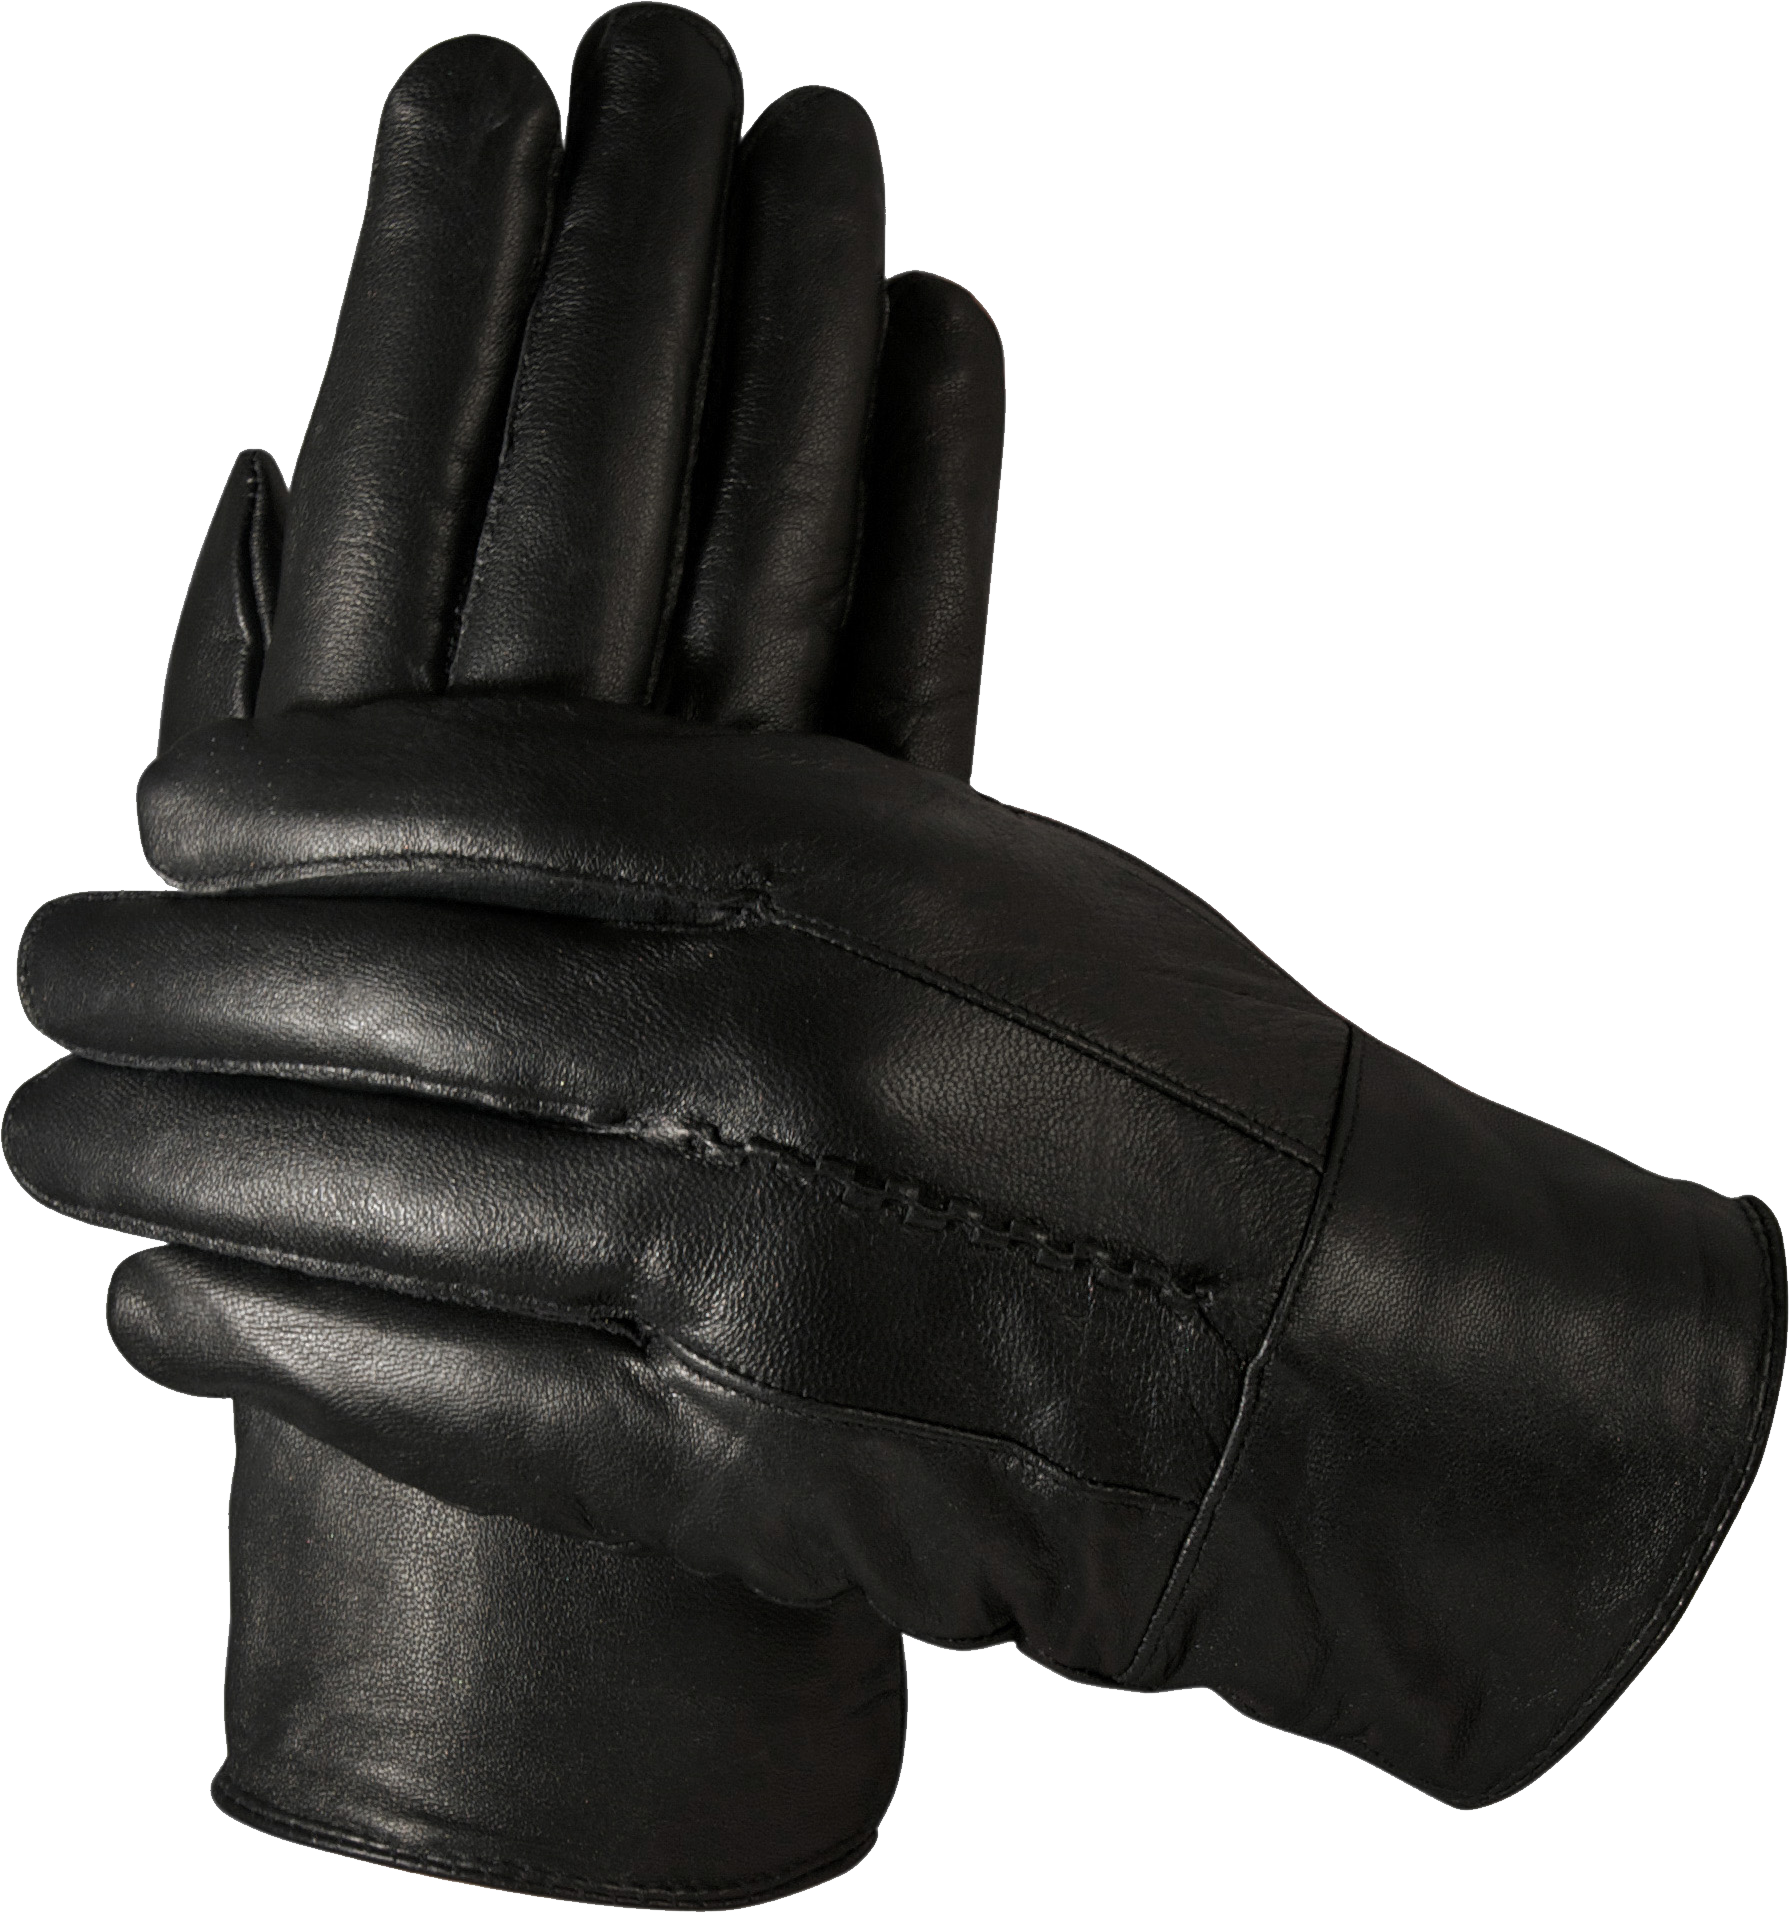 gloves clipart leather glove